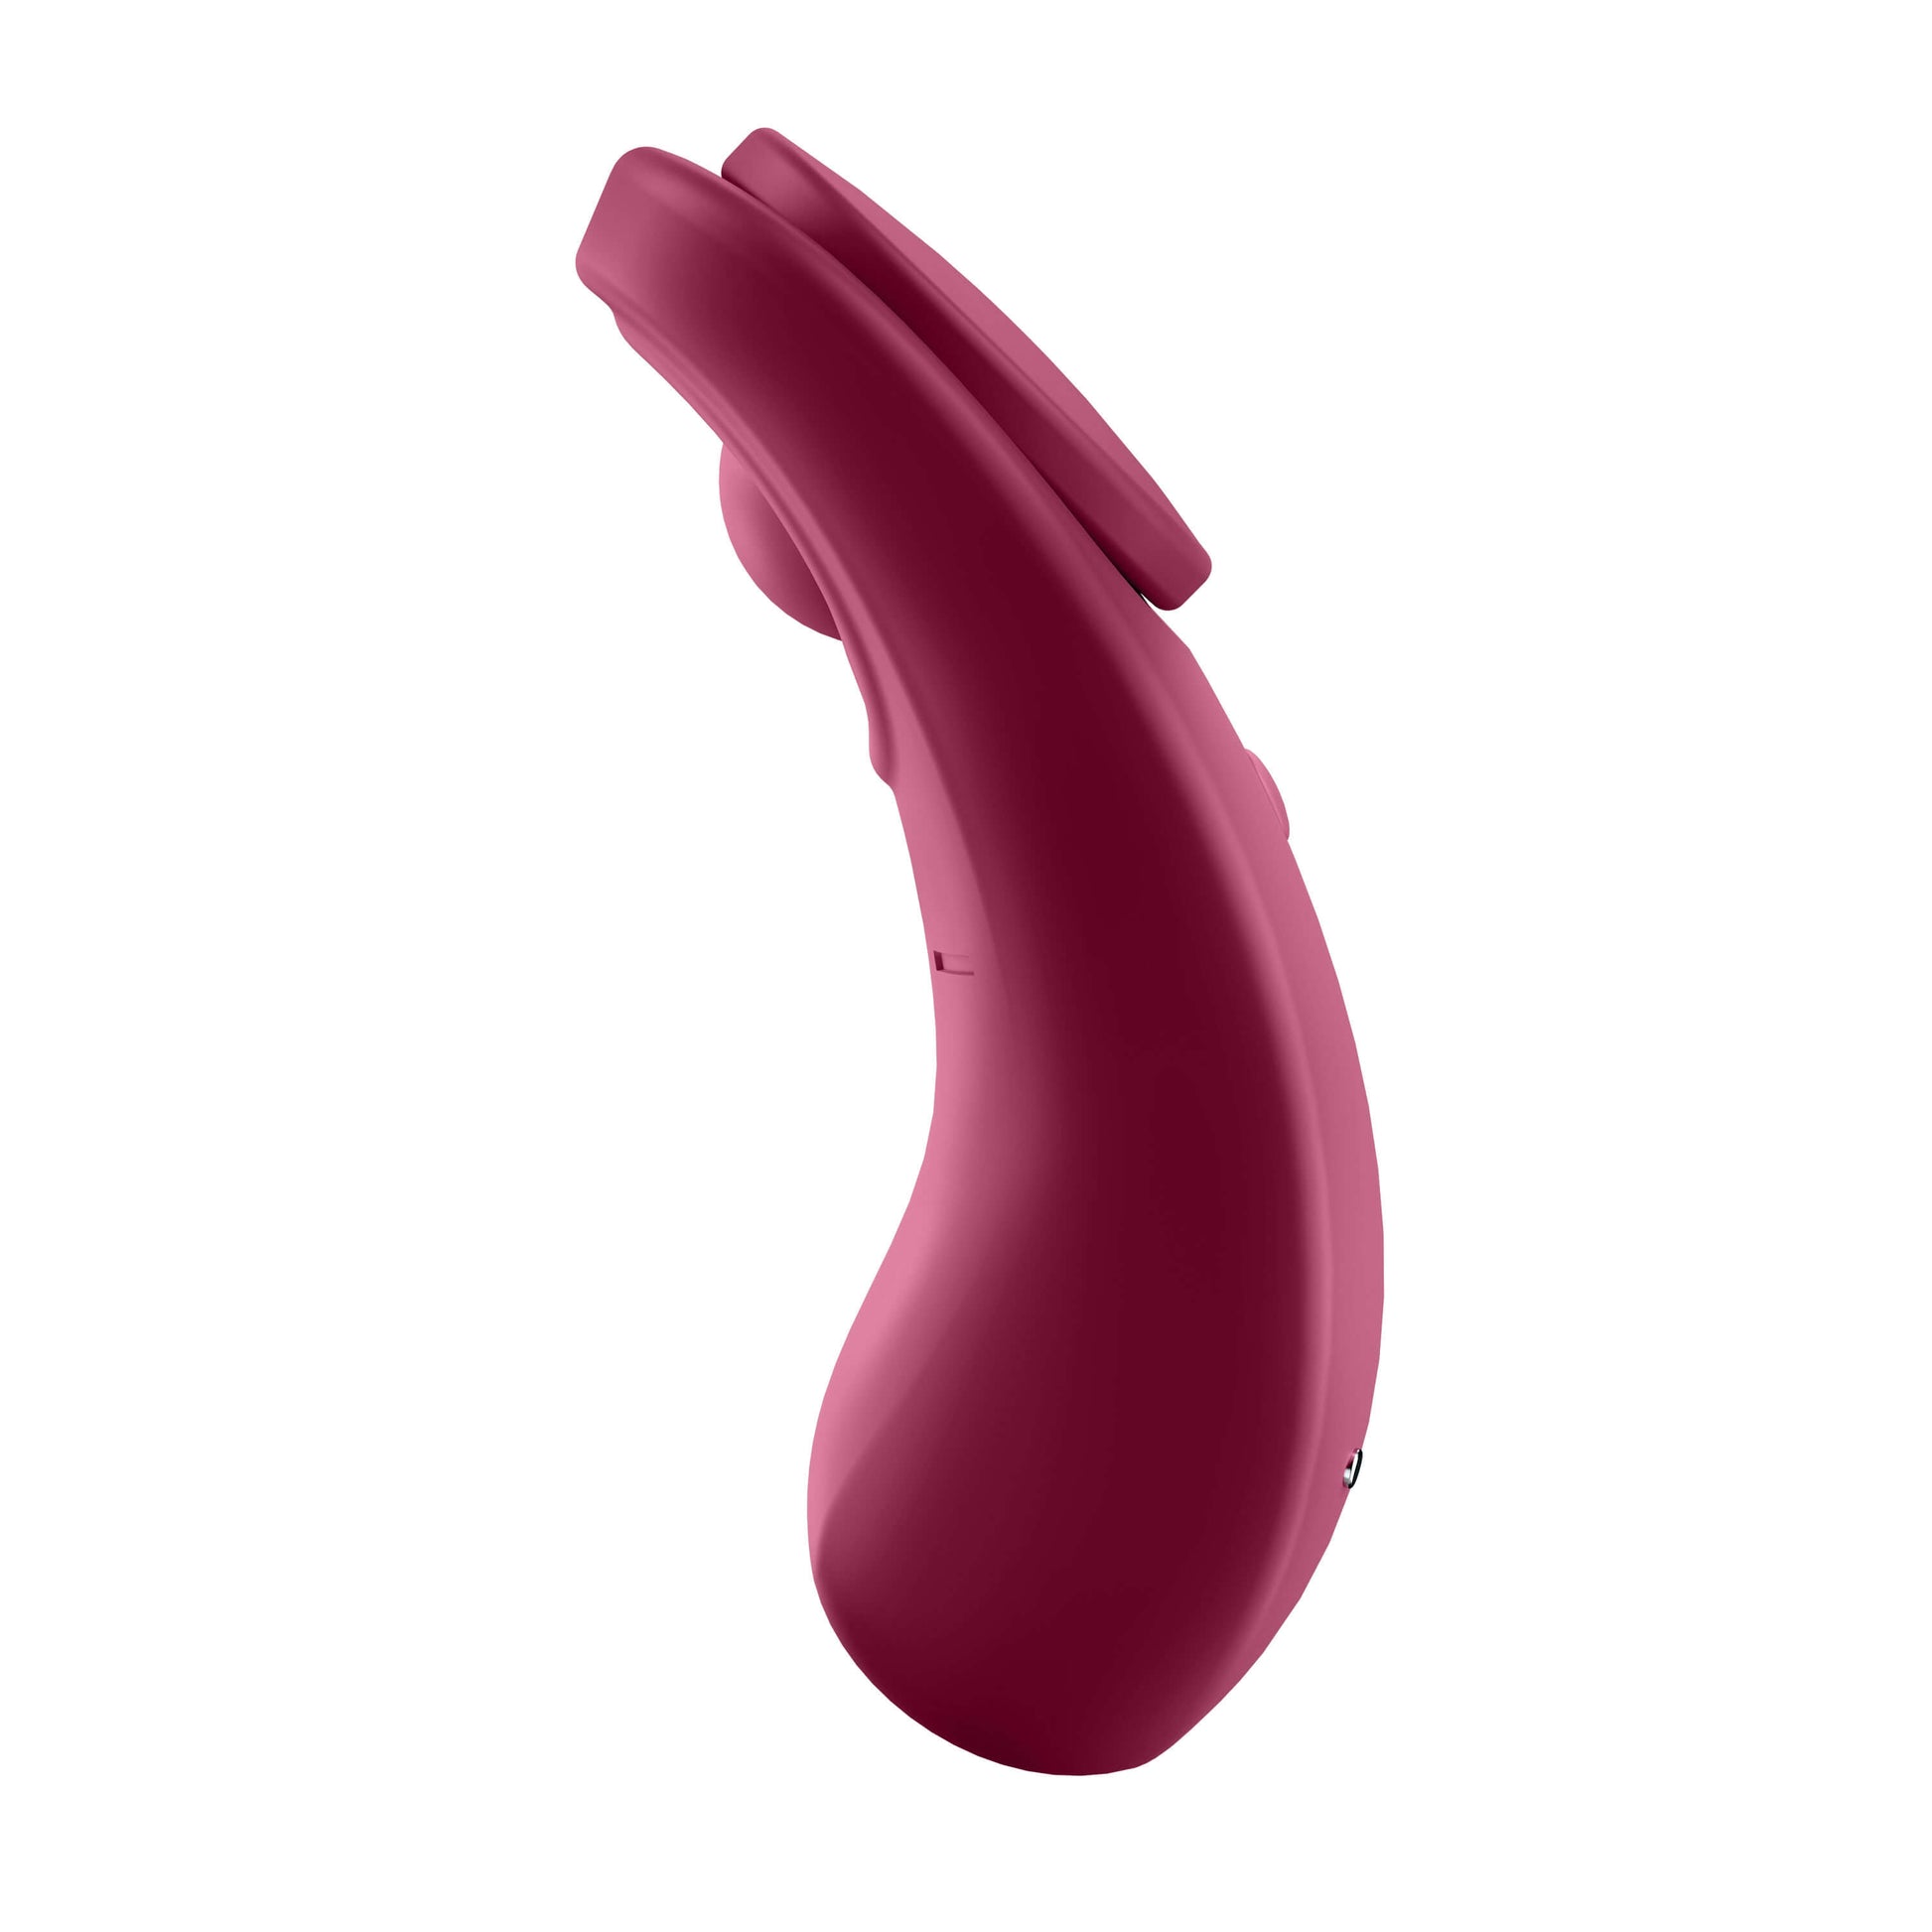 Satisfyer Sexy Secret Panty Vibrator - by The Bigger O an online sex toy shop. We ship to USA, Canada and the UK.